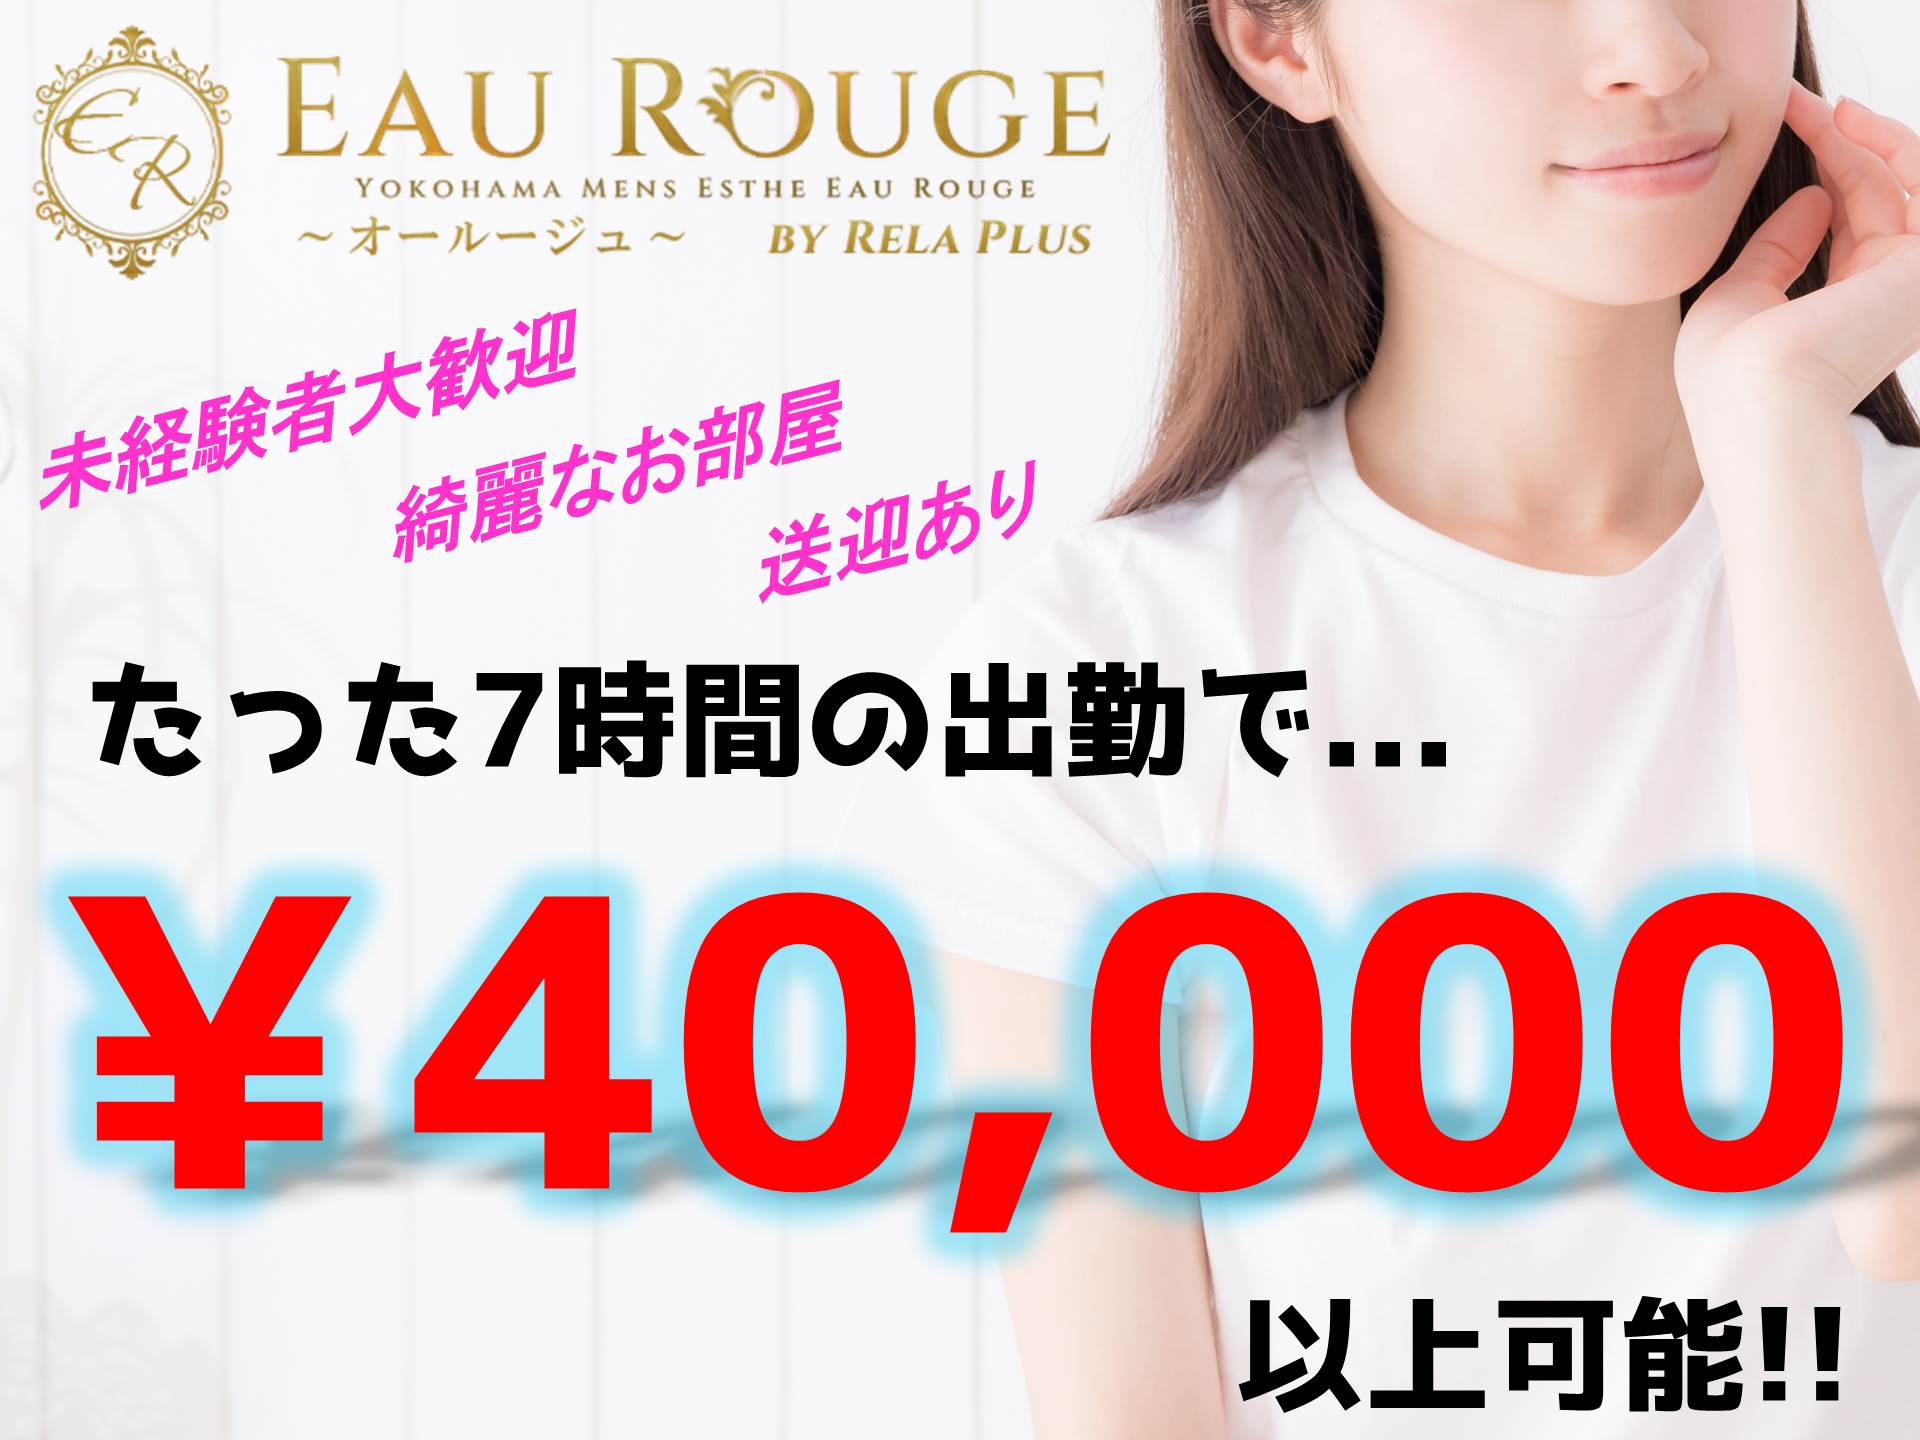 EAU ROUGE-オールージュ by RELA PLUS（横浜）の求人情報 1枚目